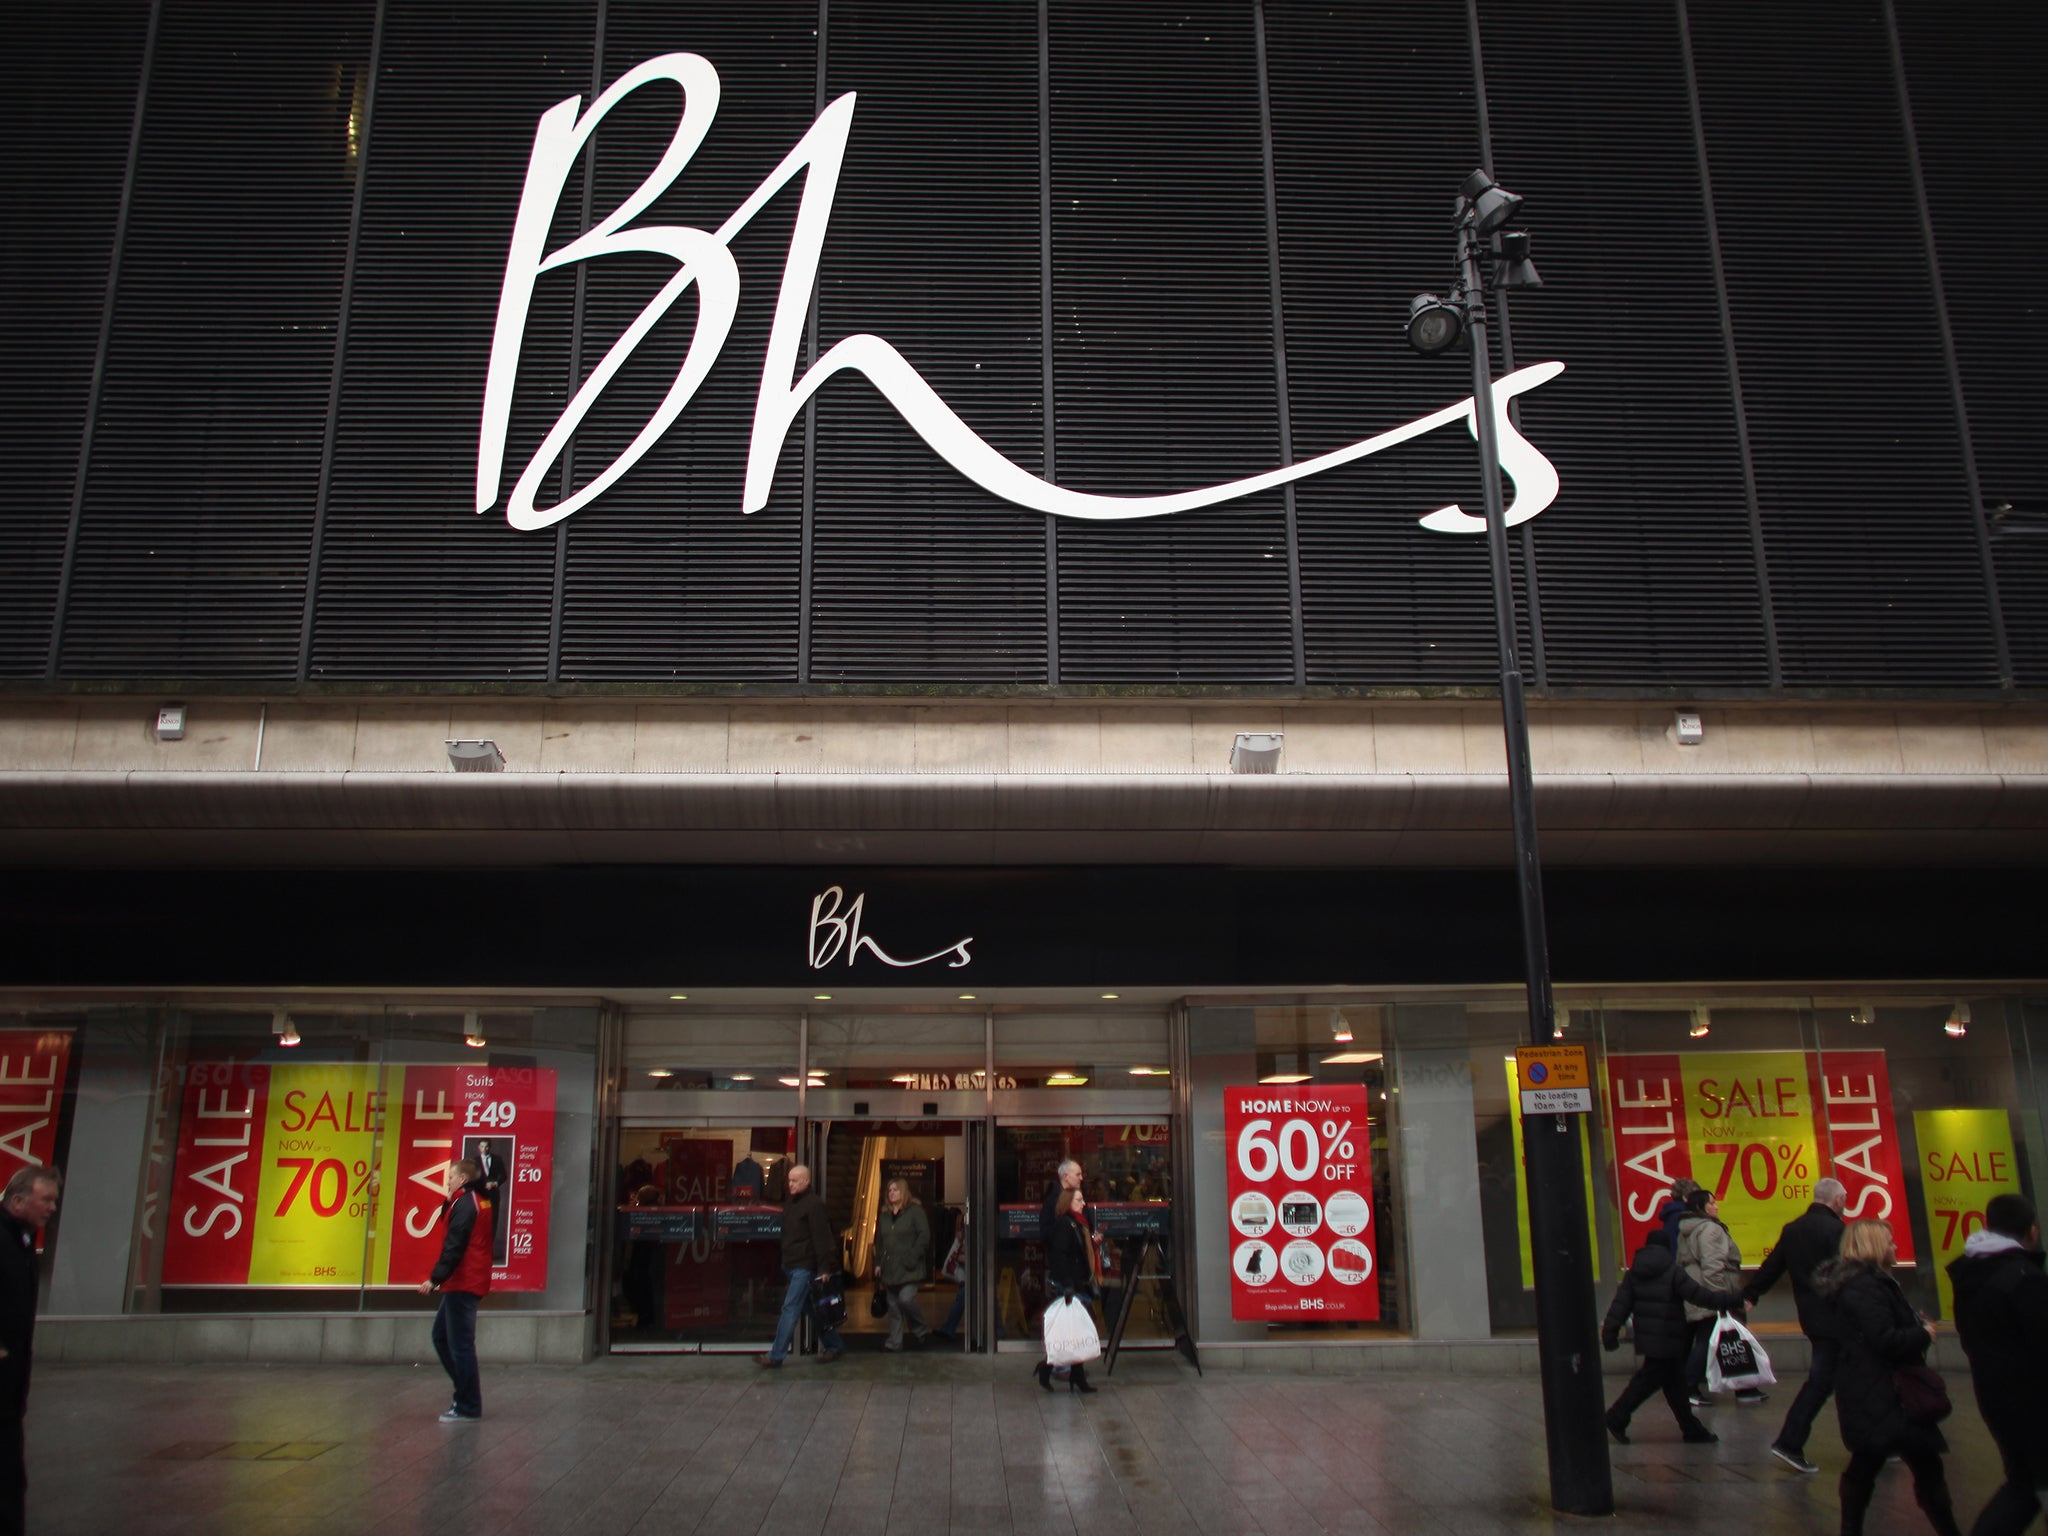 The new boss of BHS has vowed to boost performance at the loss-making company, through a series of tie-ups with other retailers